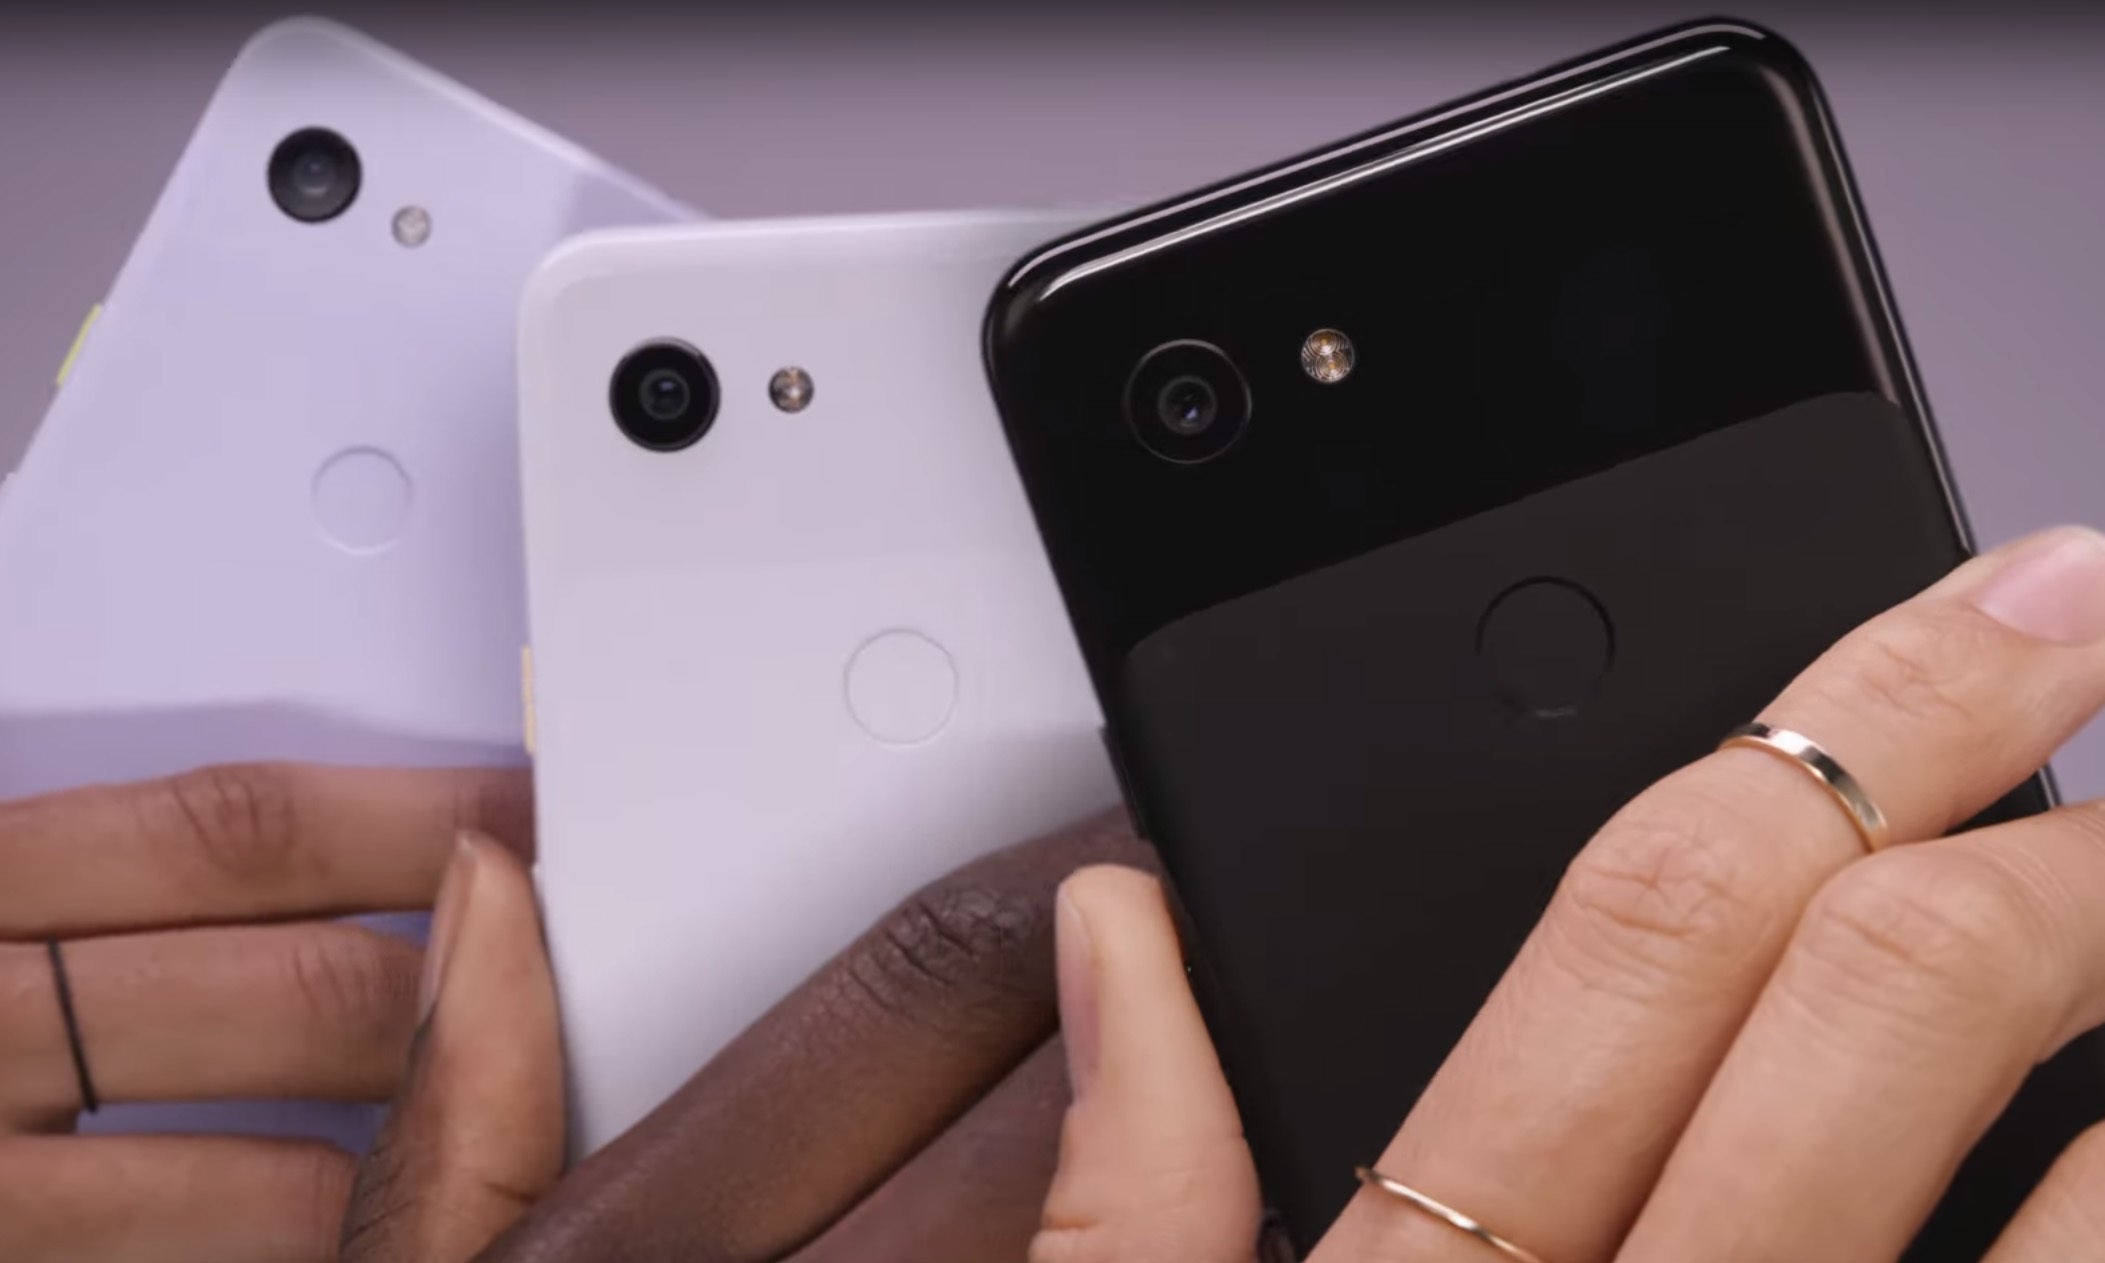 Available in three colors, including the new Purple-ish - Google Pixel 3a and Pixel 3a XL are now finally official: here's all you need to know